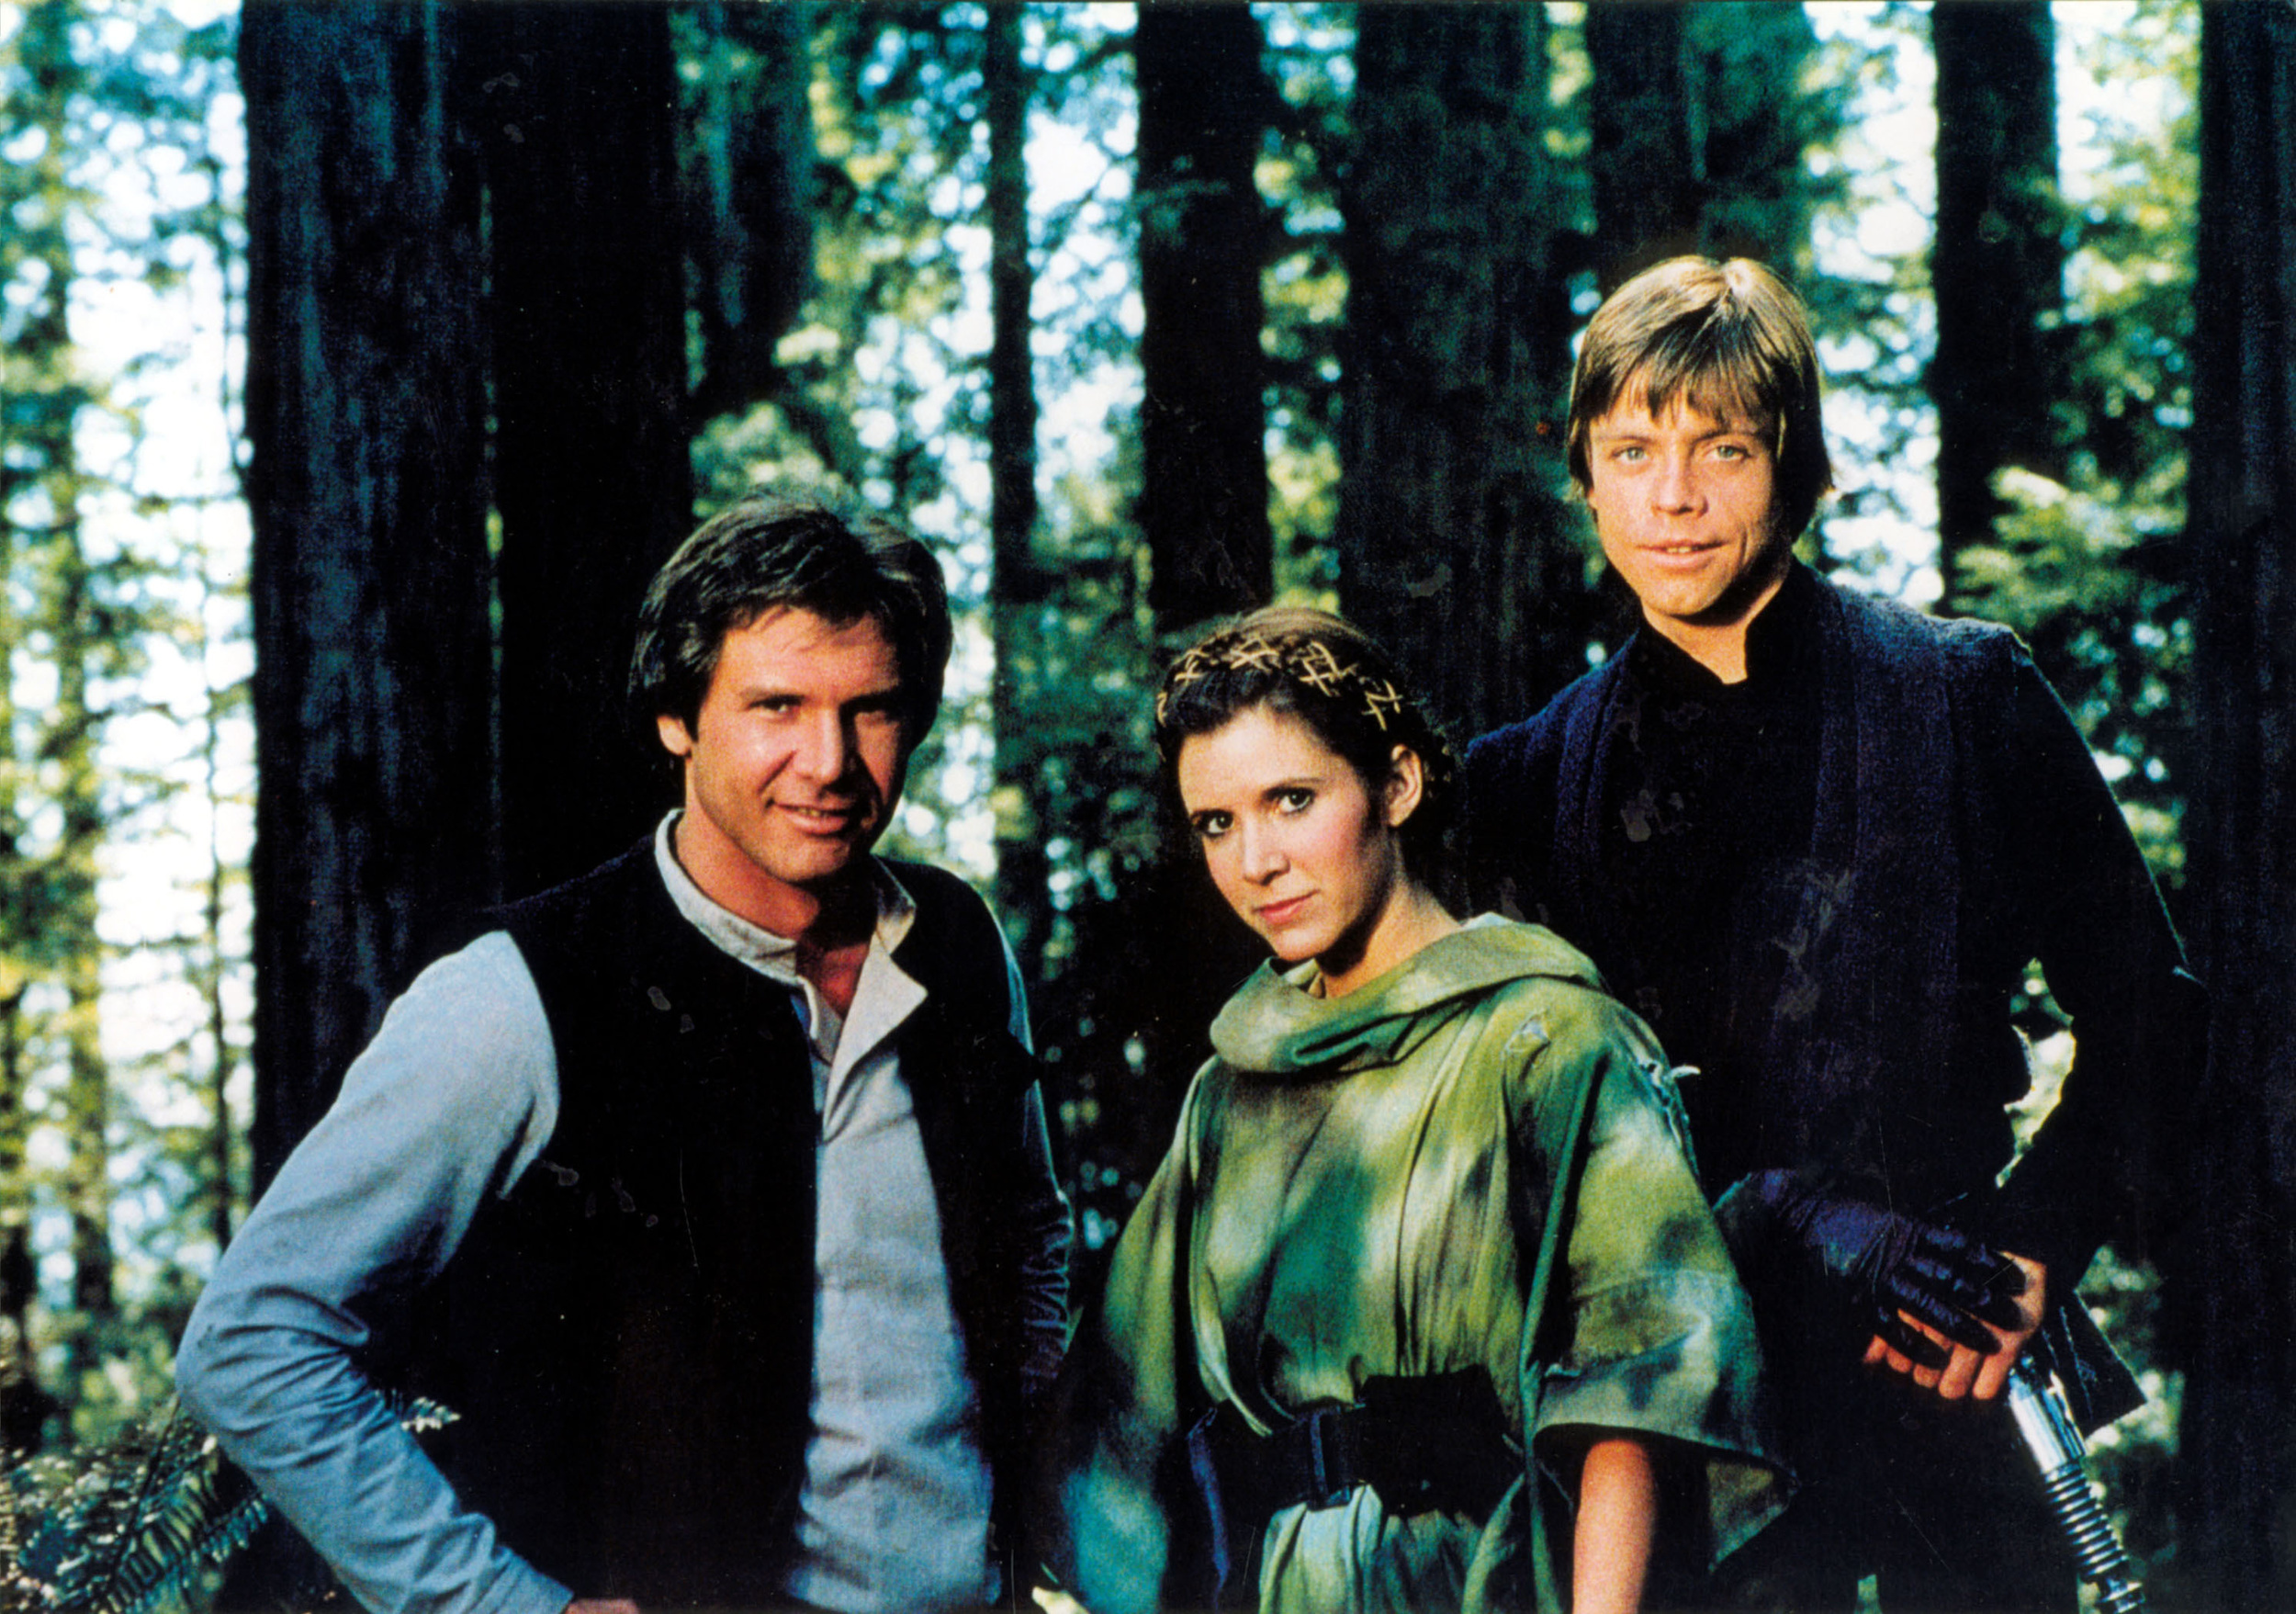 <p>With this, the original “Star Wars” trilogy ended. Some don’t like this one as much. The Ewoks were a little cheesy. Still, you can’t call “Return of the Jedi” anything but memorable. It’s an iconic film. Plus, Han Solo got out of the frozen carbonite and got to be a hero once again.</p><p><a href='https://www.msn.com/en-us/community/channel/vid-cj9pqbr0vn9in2b6ddcd8sfgpfq6x6utp44fssrv6mc2gtybw0us'>Follow us on MSN to see more of our exclusive entertainment content.</a></p>